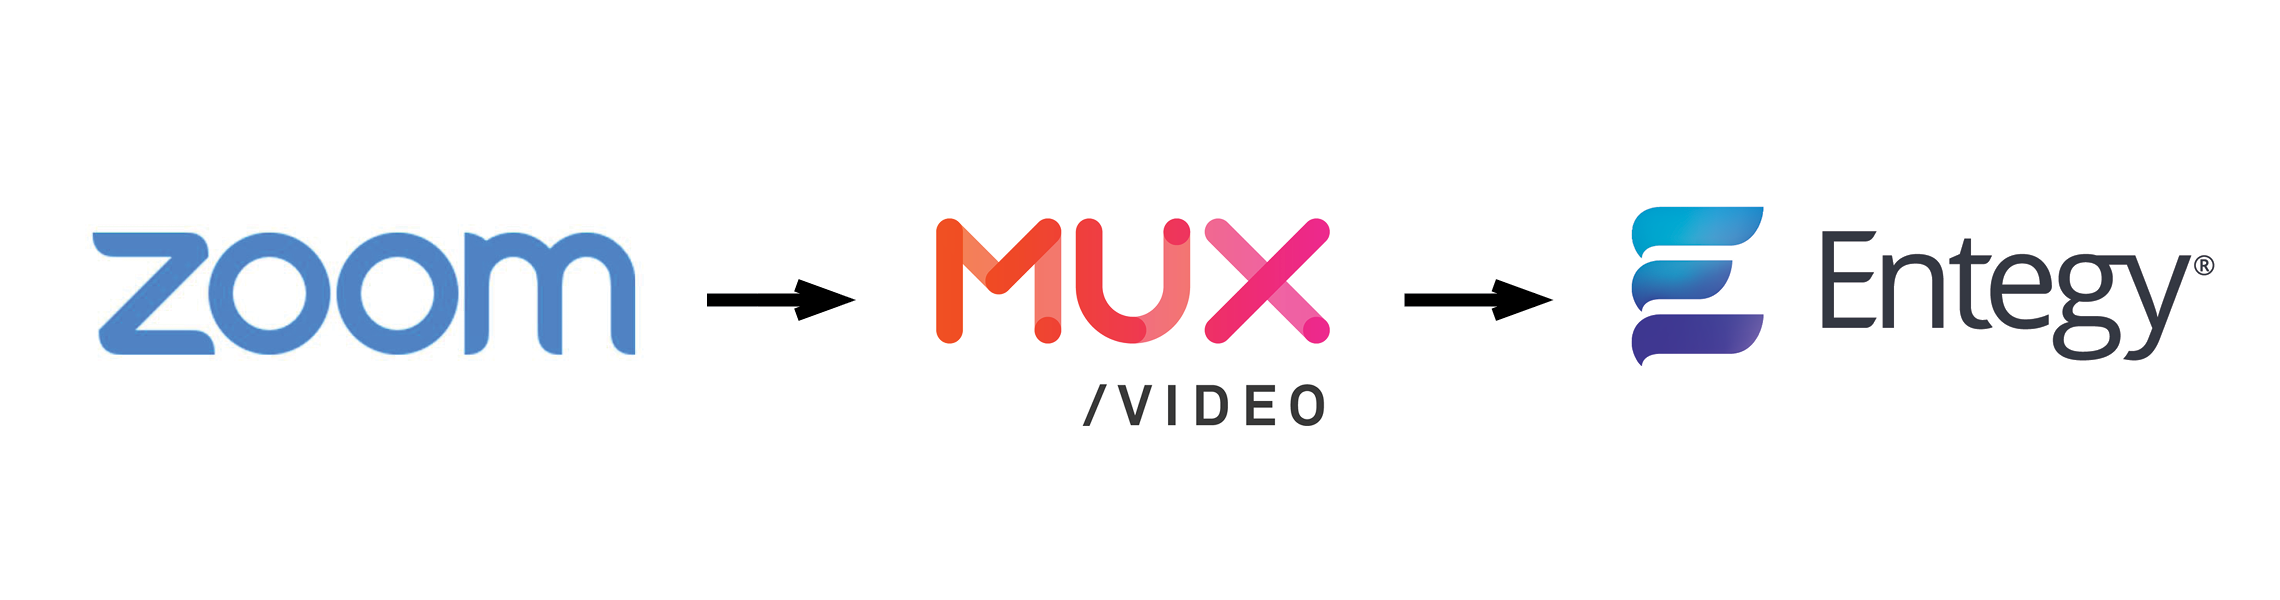 mux-video-logo-square-sml-2.png